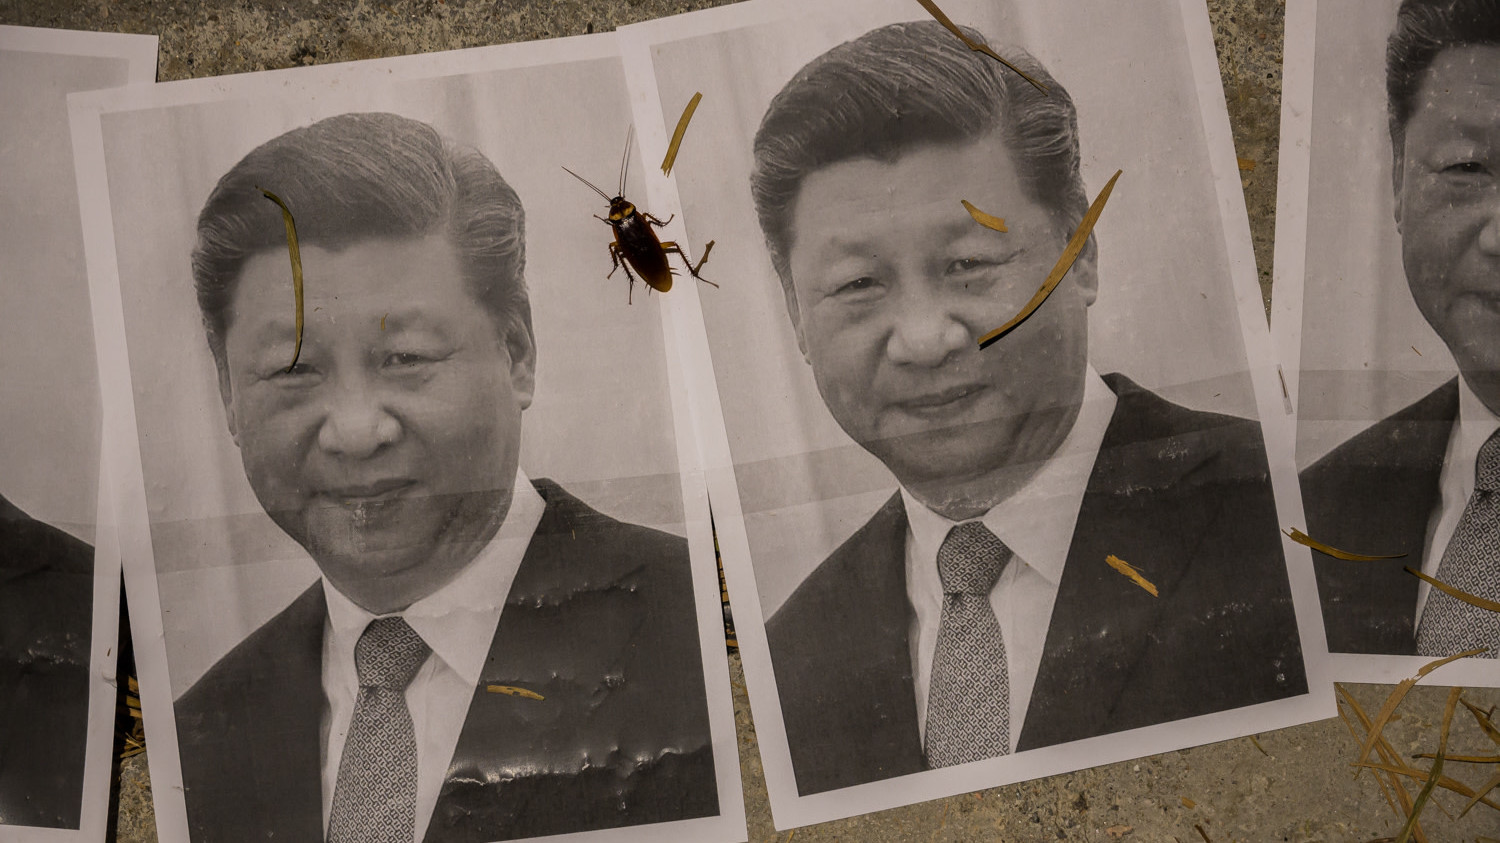 Posters of Xi Jinping seen during a rally to support imprisoned Uyghurs at the Chinese University of Hong Kong on September 25, 2019 in Hong Kong. (Photo: Getty Images)